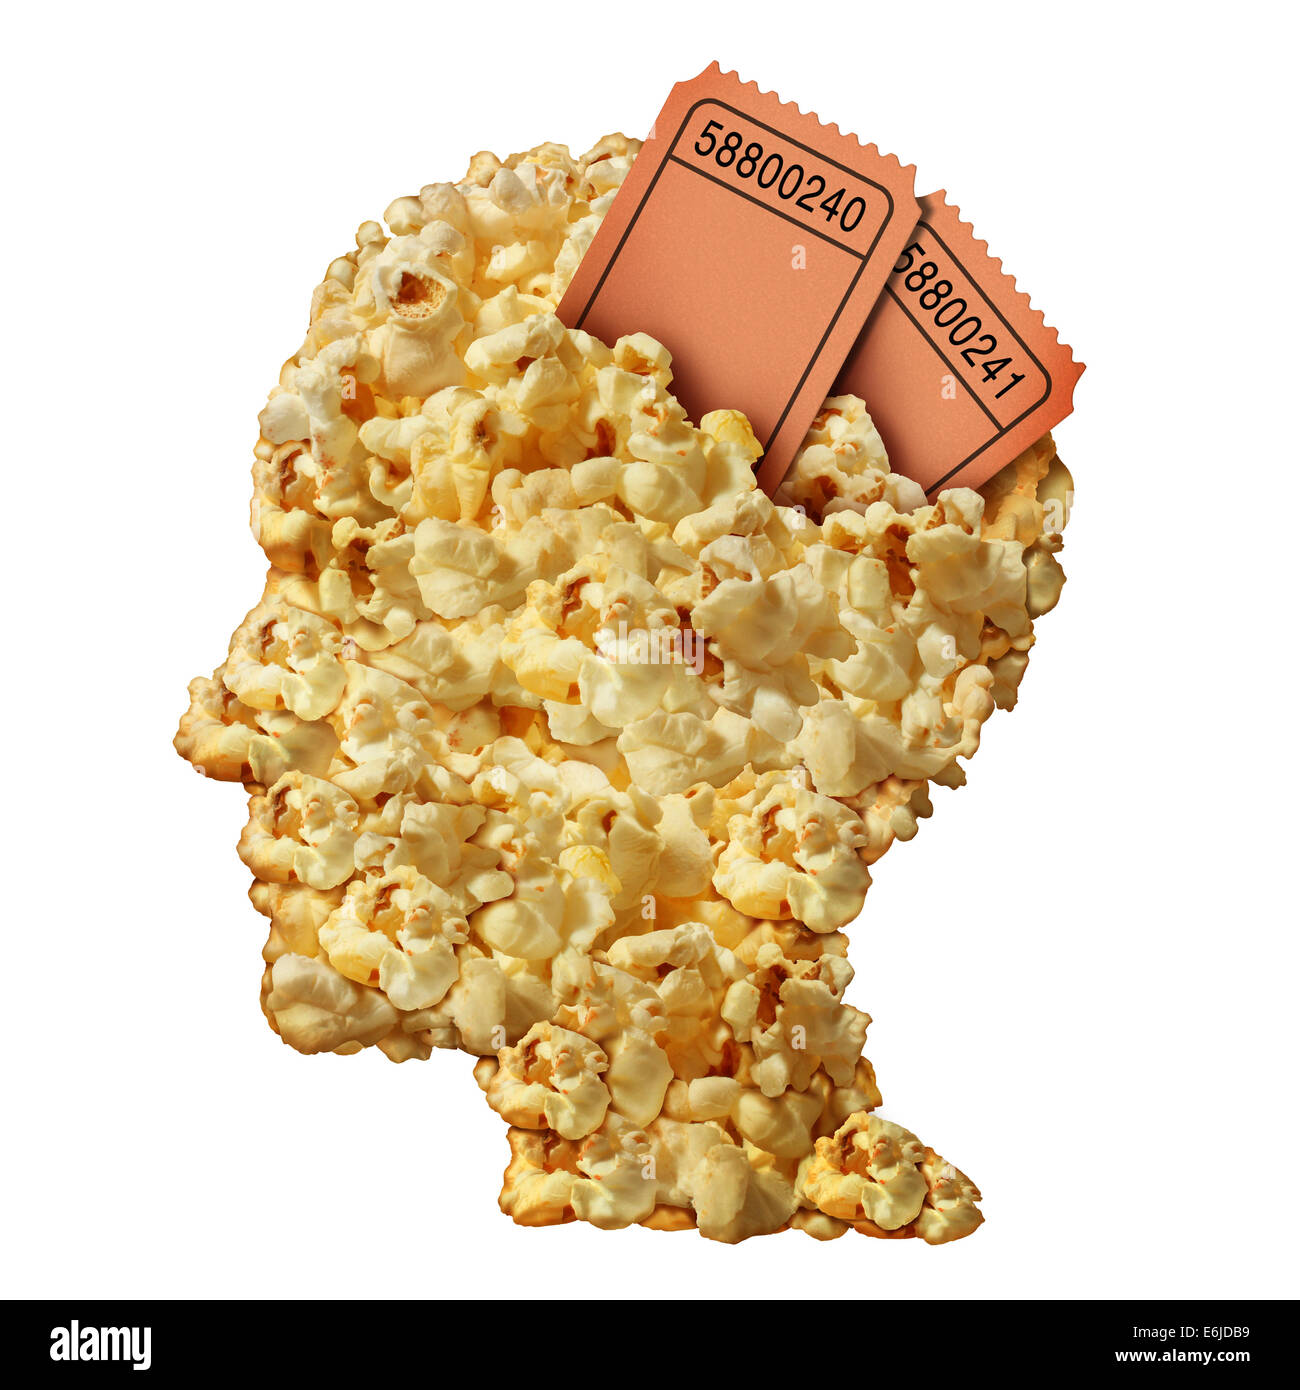 Thinking movies concept and movie guide or reviews symbol as a heap of popcorn shaped as a human head with ticket stubs emerging as an icon for entertainment issues and public media consumption. Stock Photo